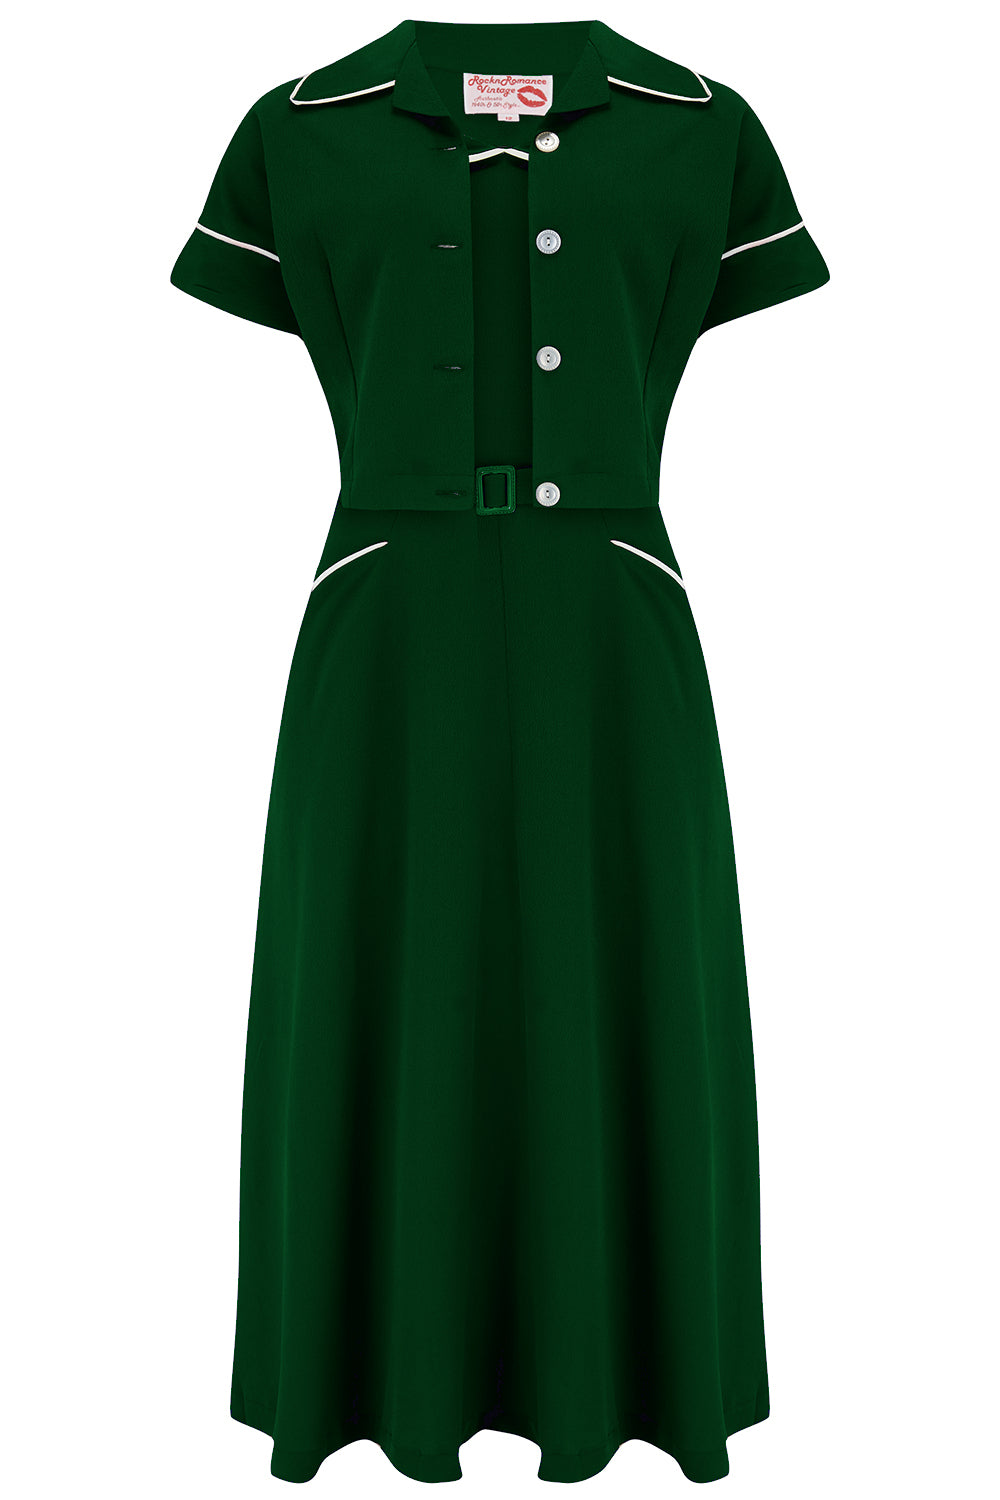 1950s Dresses with Sleeves | Long, Mid, Elbow Length Sleeves The Lucille 2pc Sweetheart Dress  Bolero Set In Green  Ivory Contrast True Late 1940s - Early 50s Vintage Style £59.00 AT vintagedancer.com